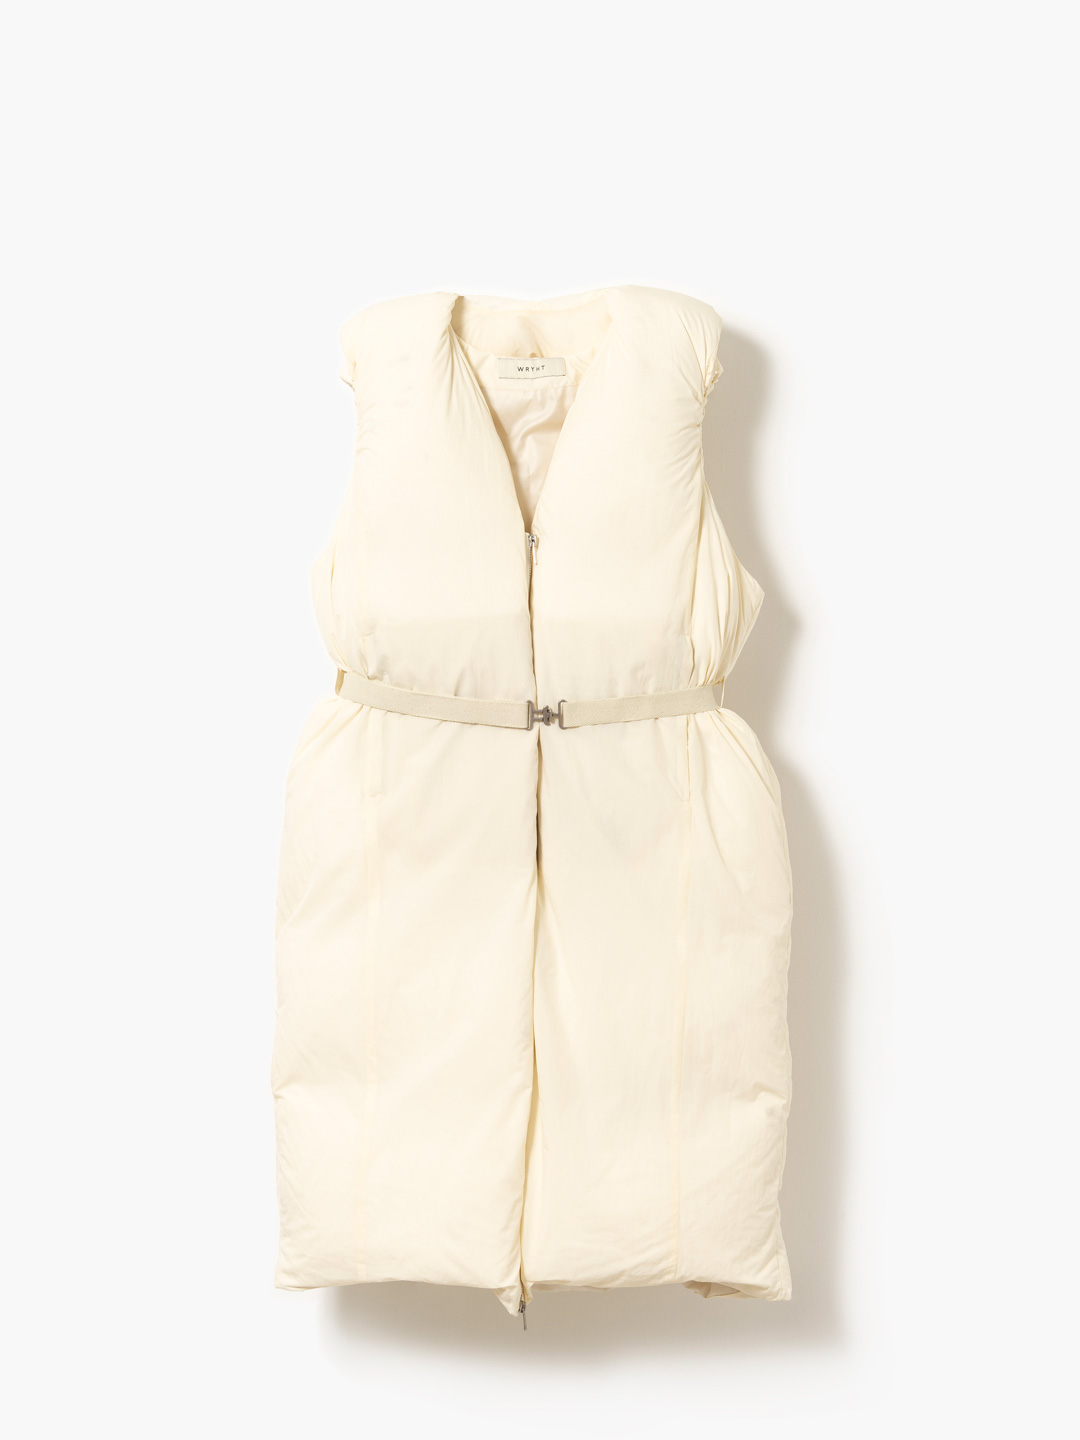 Floating Puff Vest  - Off White